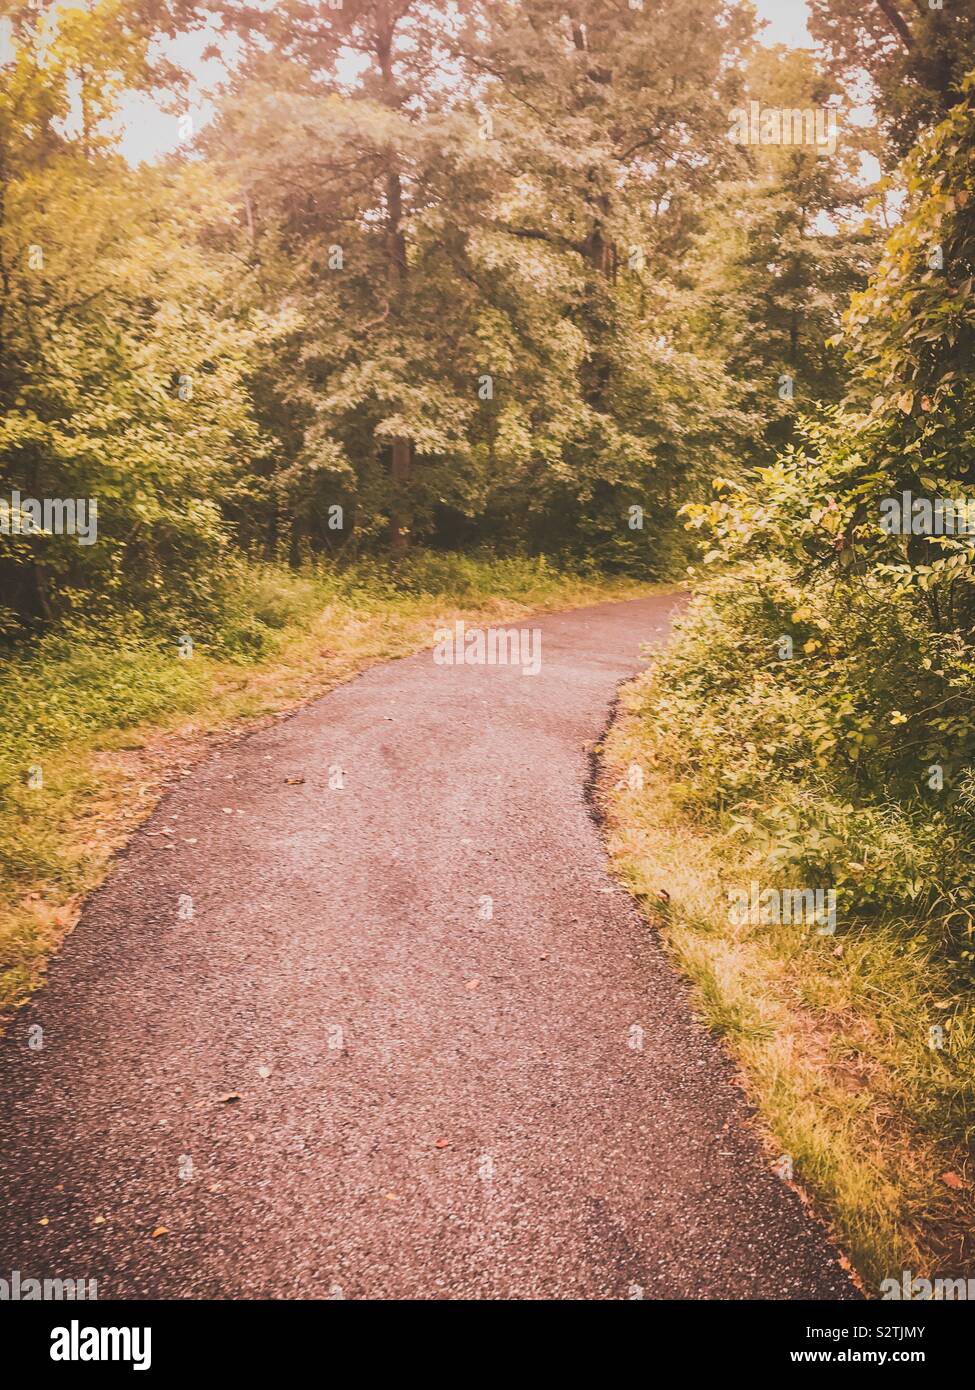 The unbeaten path, the road less traveled Stock Photo